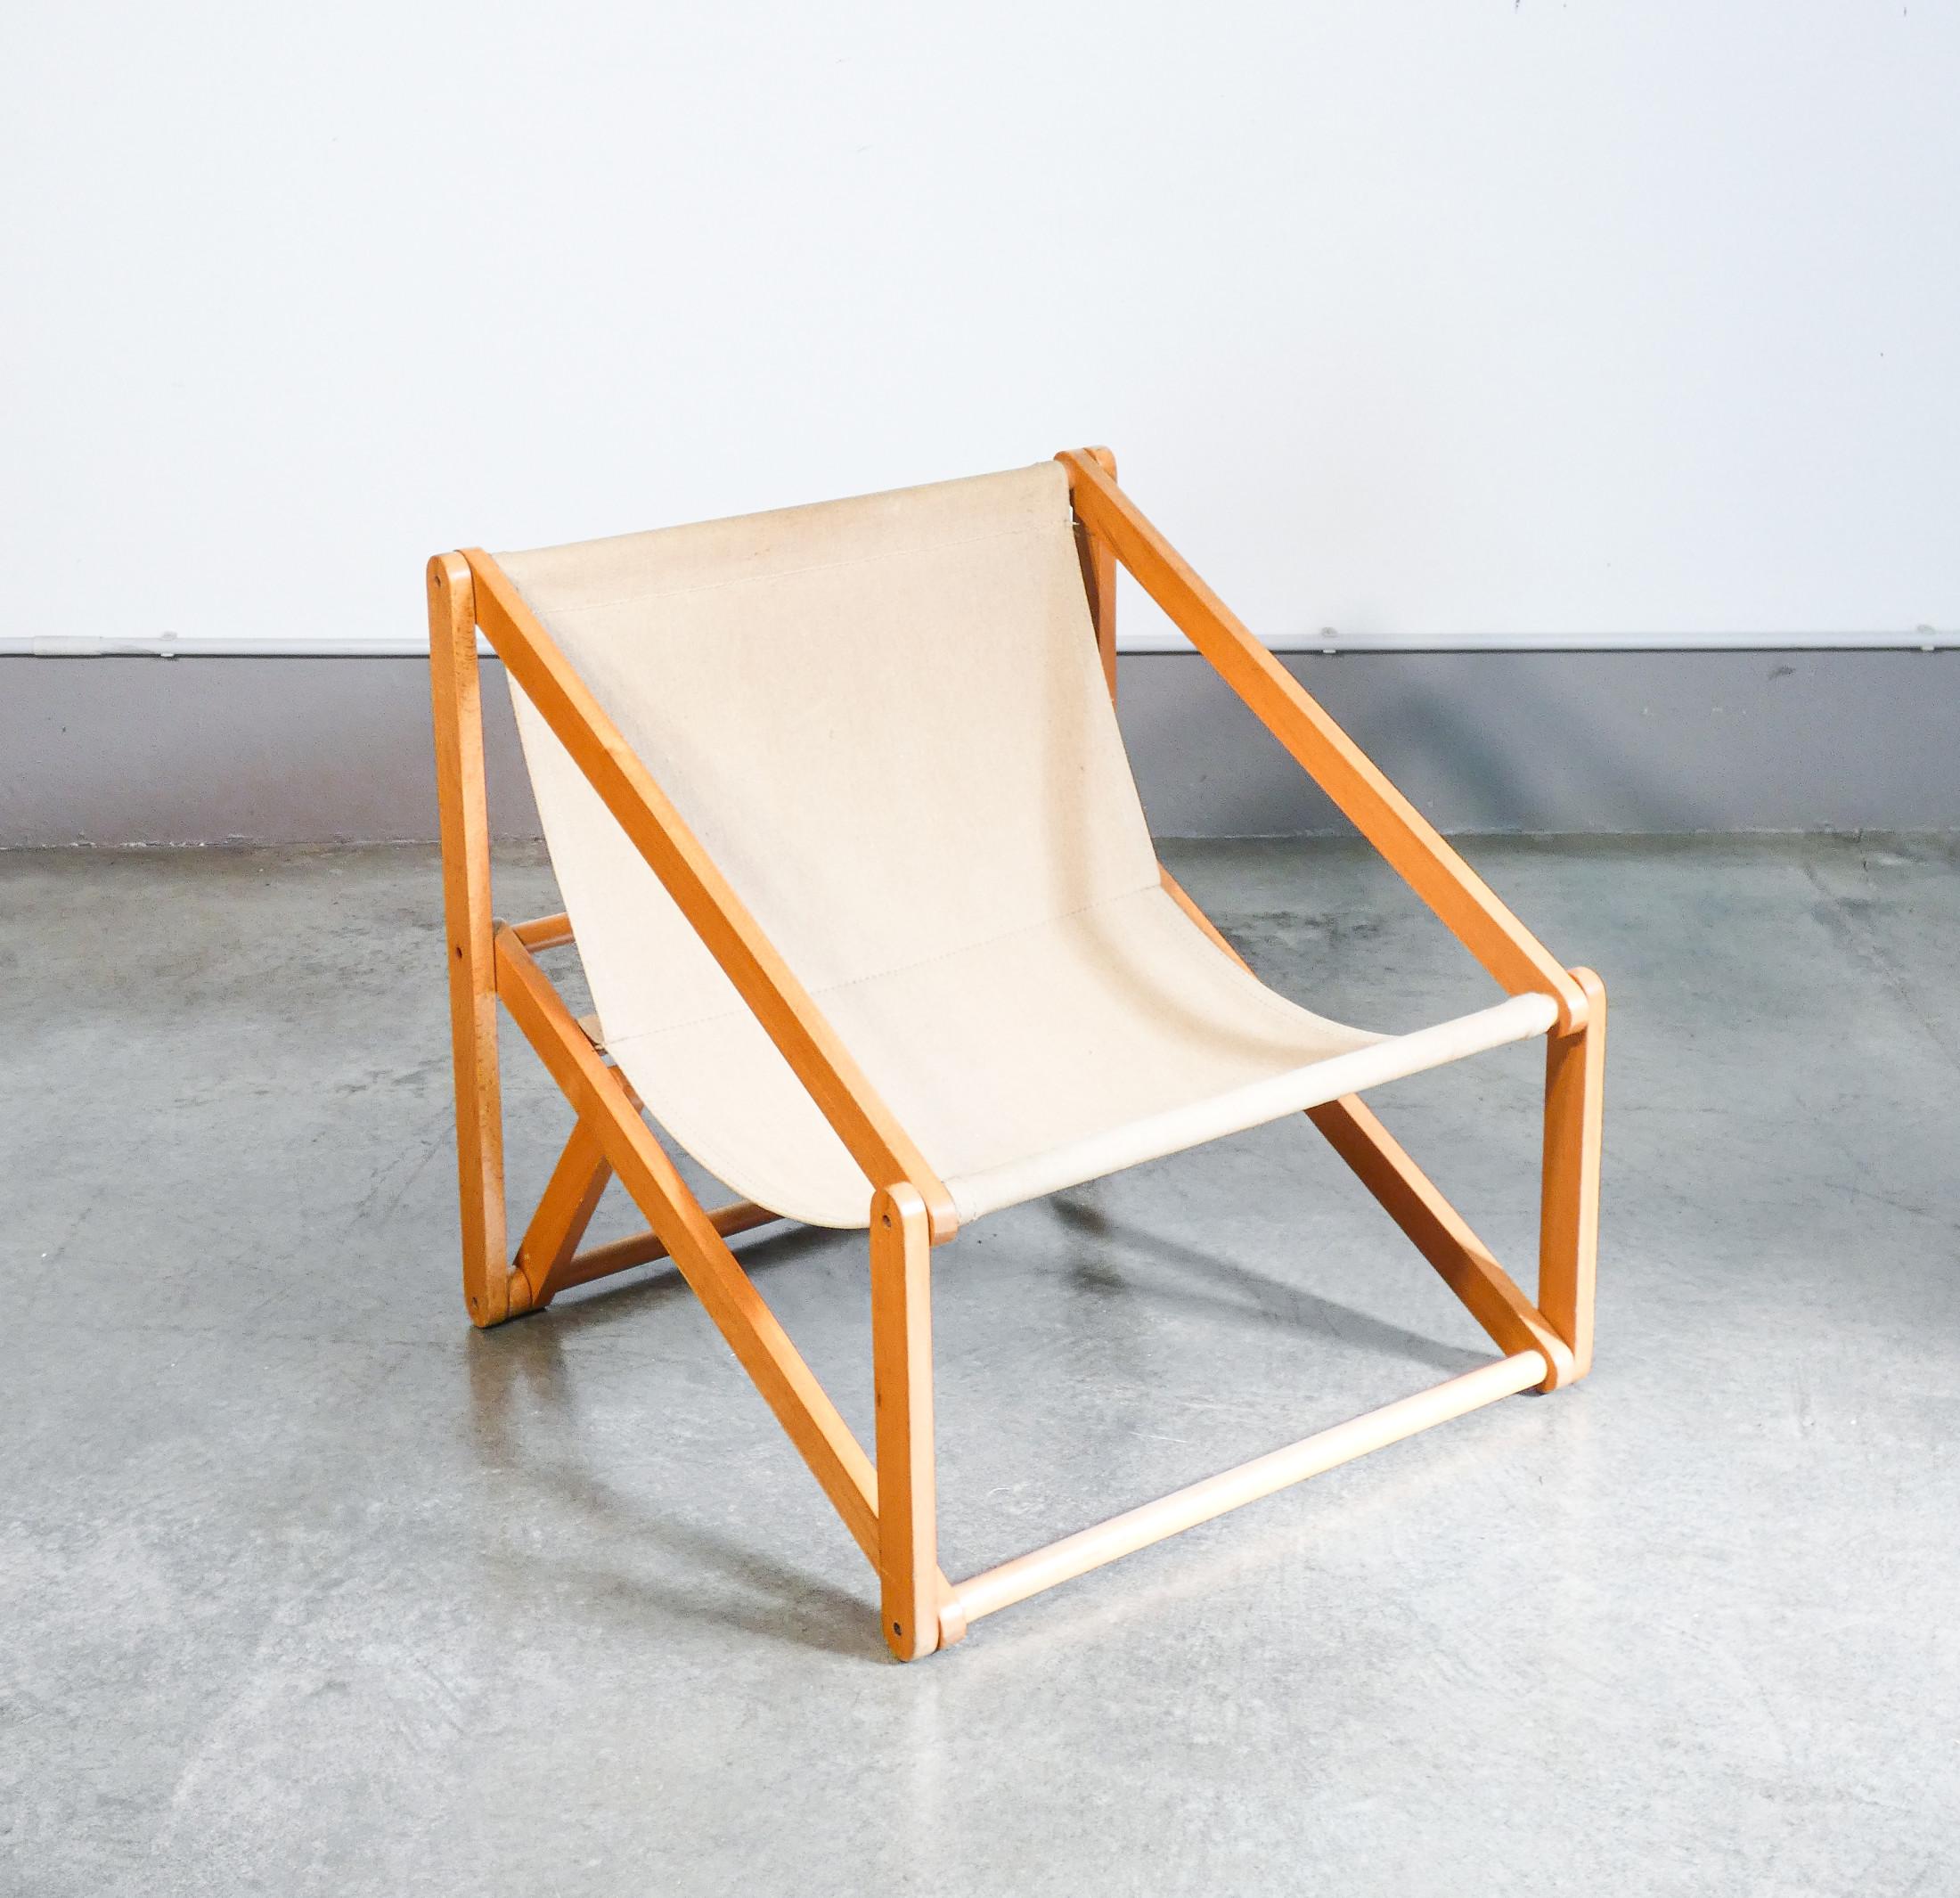 Folding armchair
London
design Günter SULZ.

ORIGIN
Germany

PERIOD
1971

DESIGNER
Günter SULZ

MODEL
London

MATERIALS
Solid wood
and fabric

DIMENSIONS
Height: 68 cm
Width: 69cm
Depth:68 cm
Seat: 30 cm

CONDITIONS
The chair is in very good